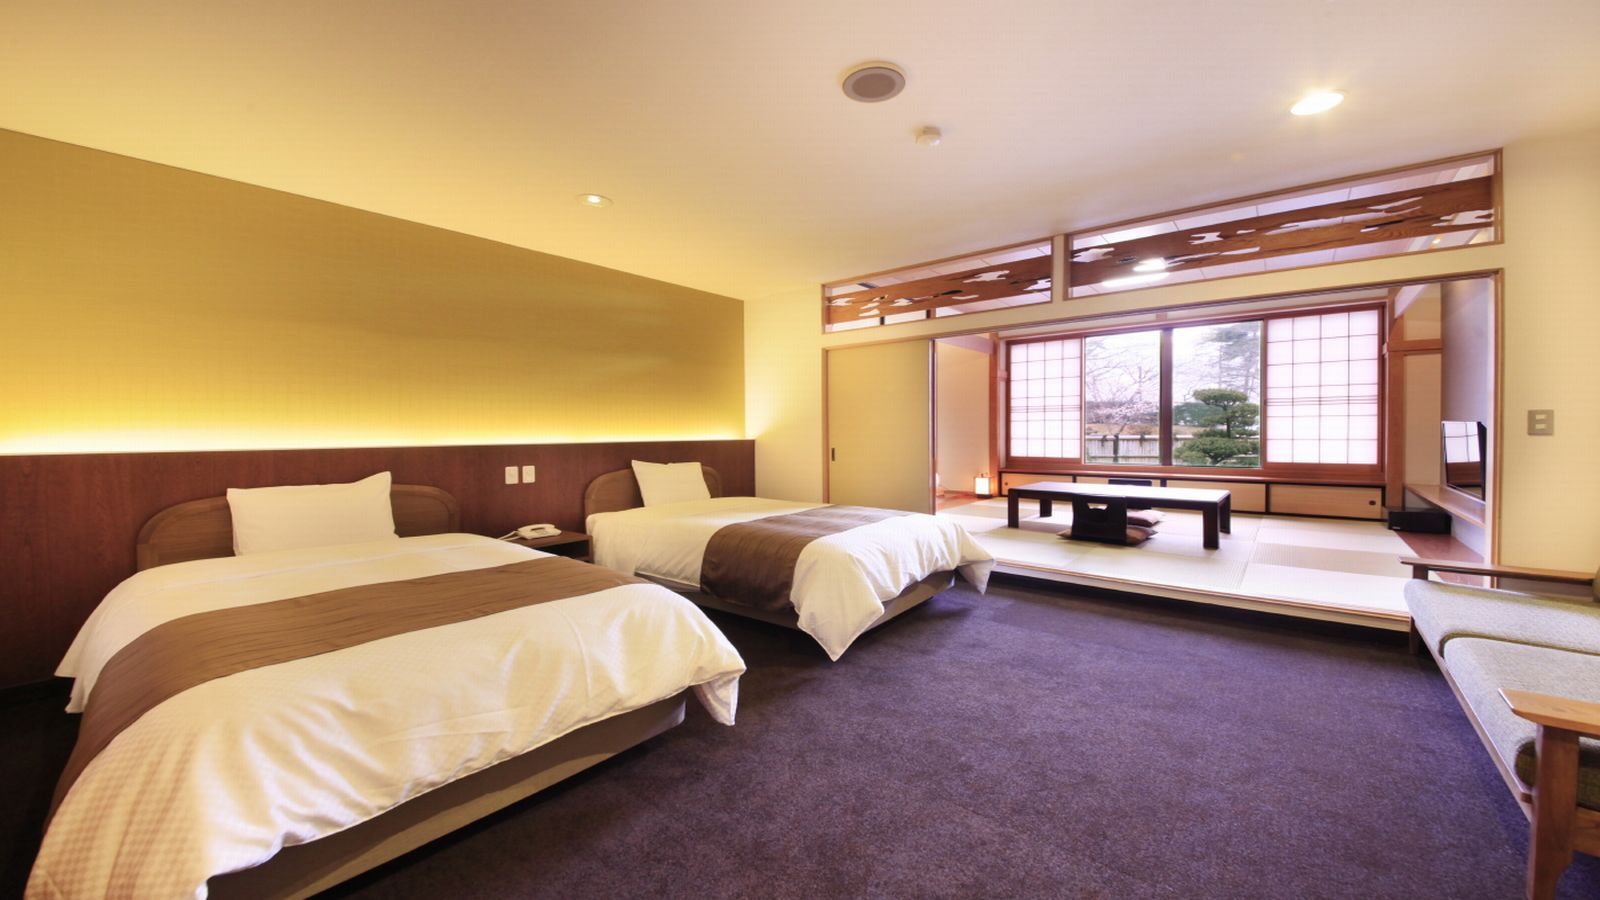 Batou Onsenkyo Nampeidai Onsen Hotel Batou Onsenkyo Nampeidai Onsen Hotel is conveniently located in the popular Nakagawa area. The property offers guests a range of services and amenities designed to provide comfort and convenience. Ser